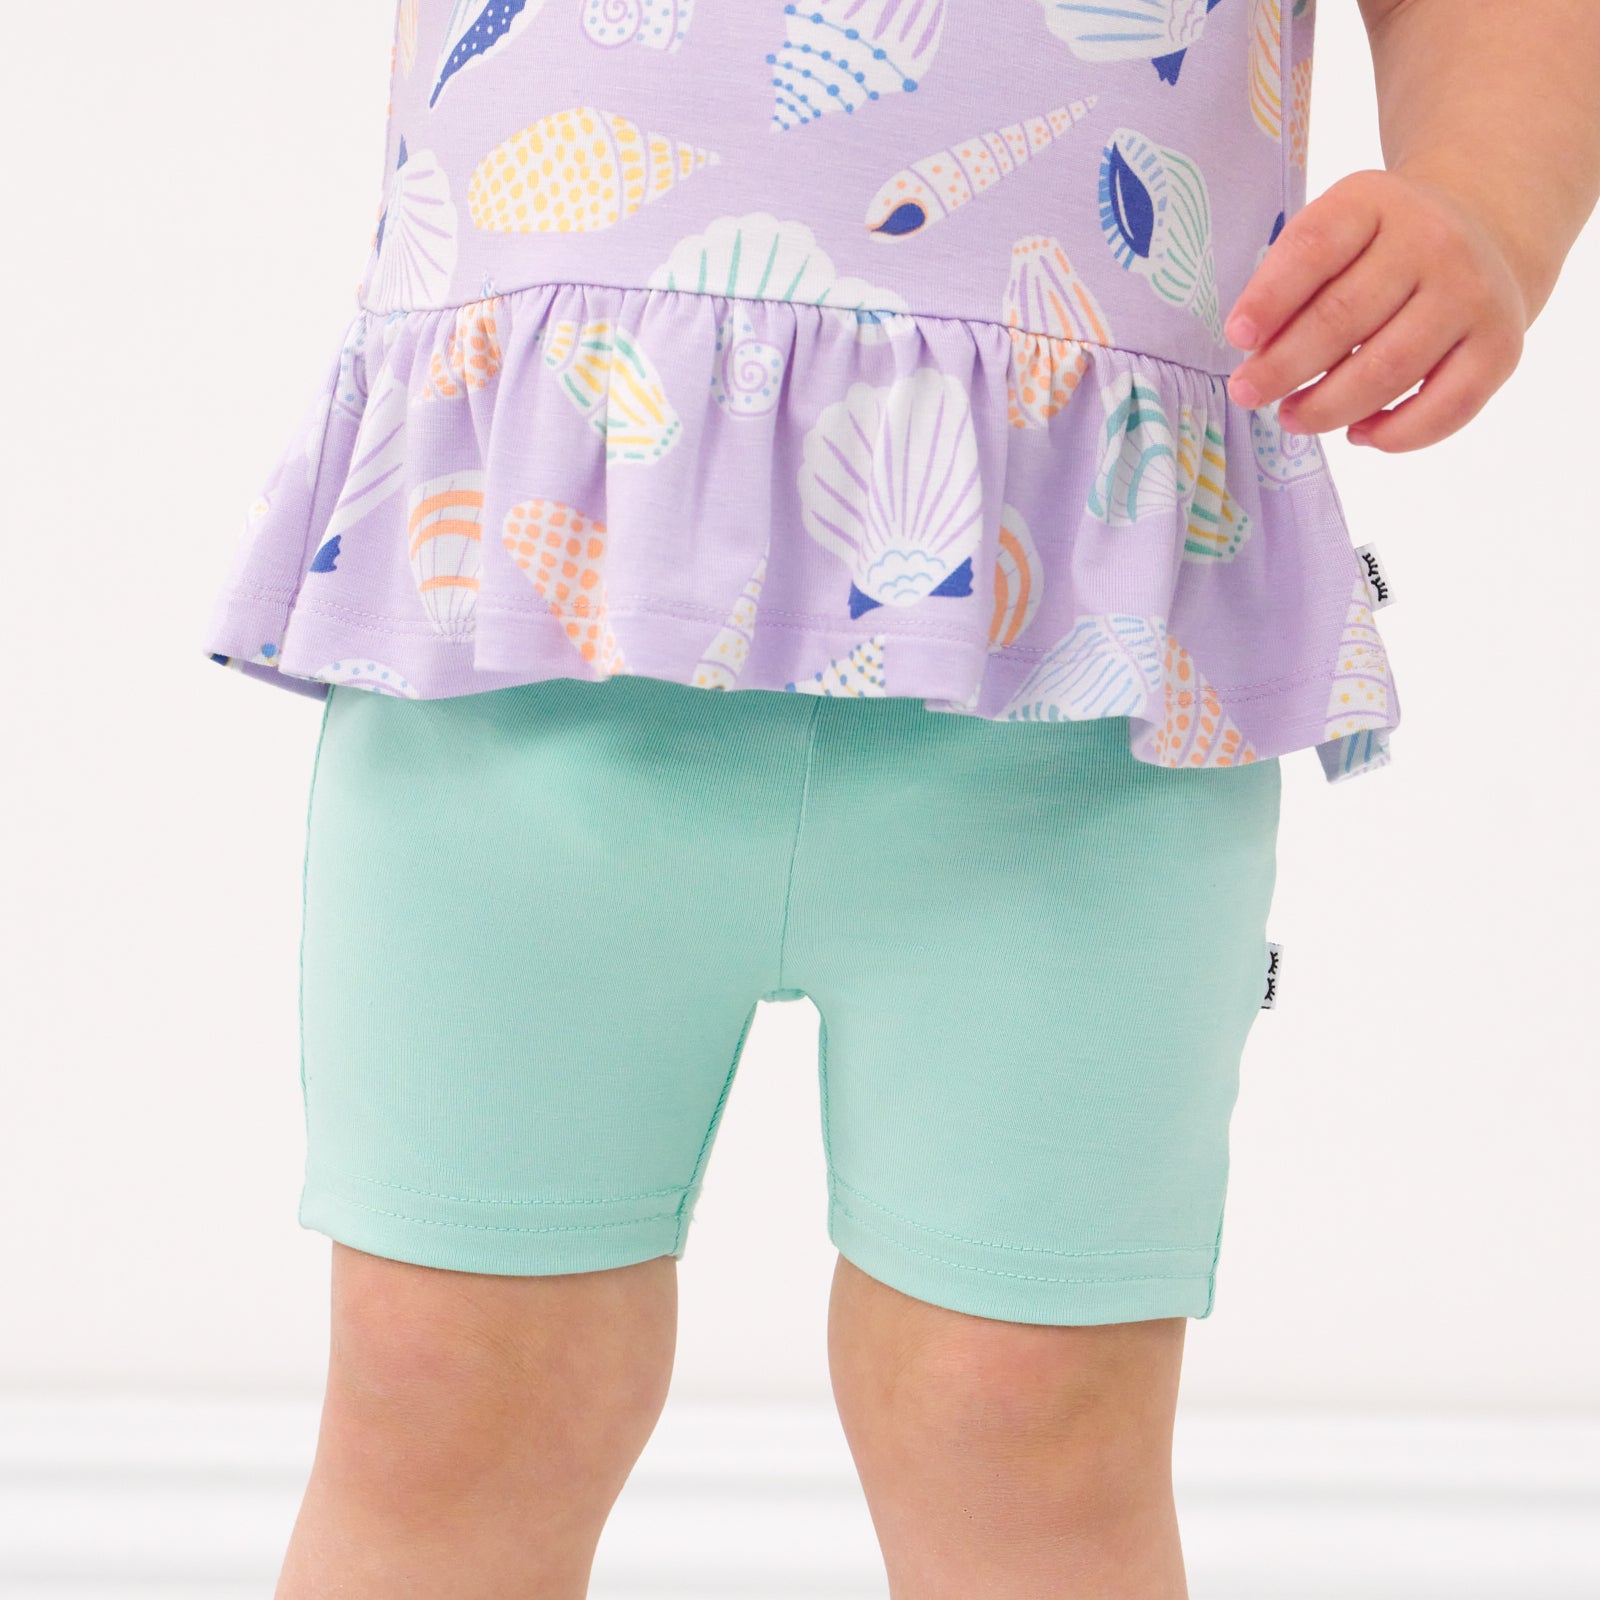 Close up image of a child wearing Ocean Waves bike shorts and coordinating Play top